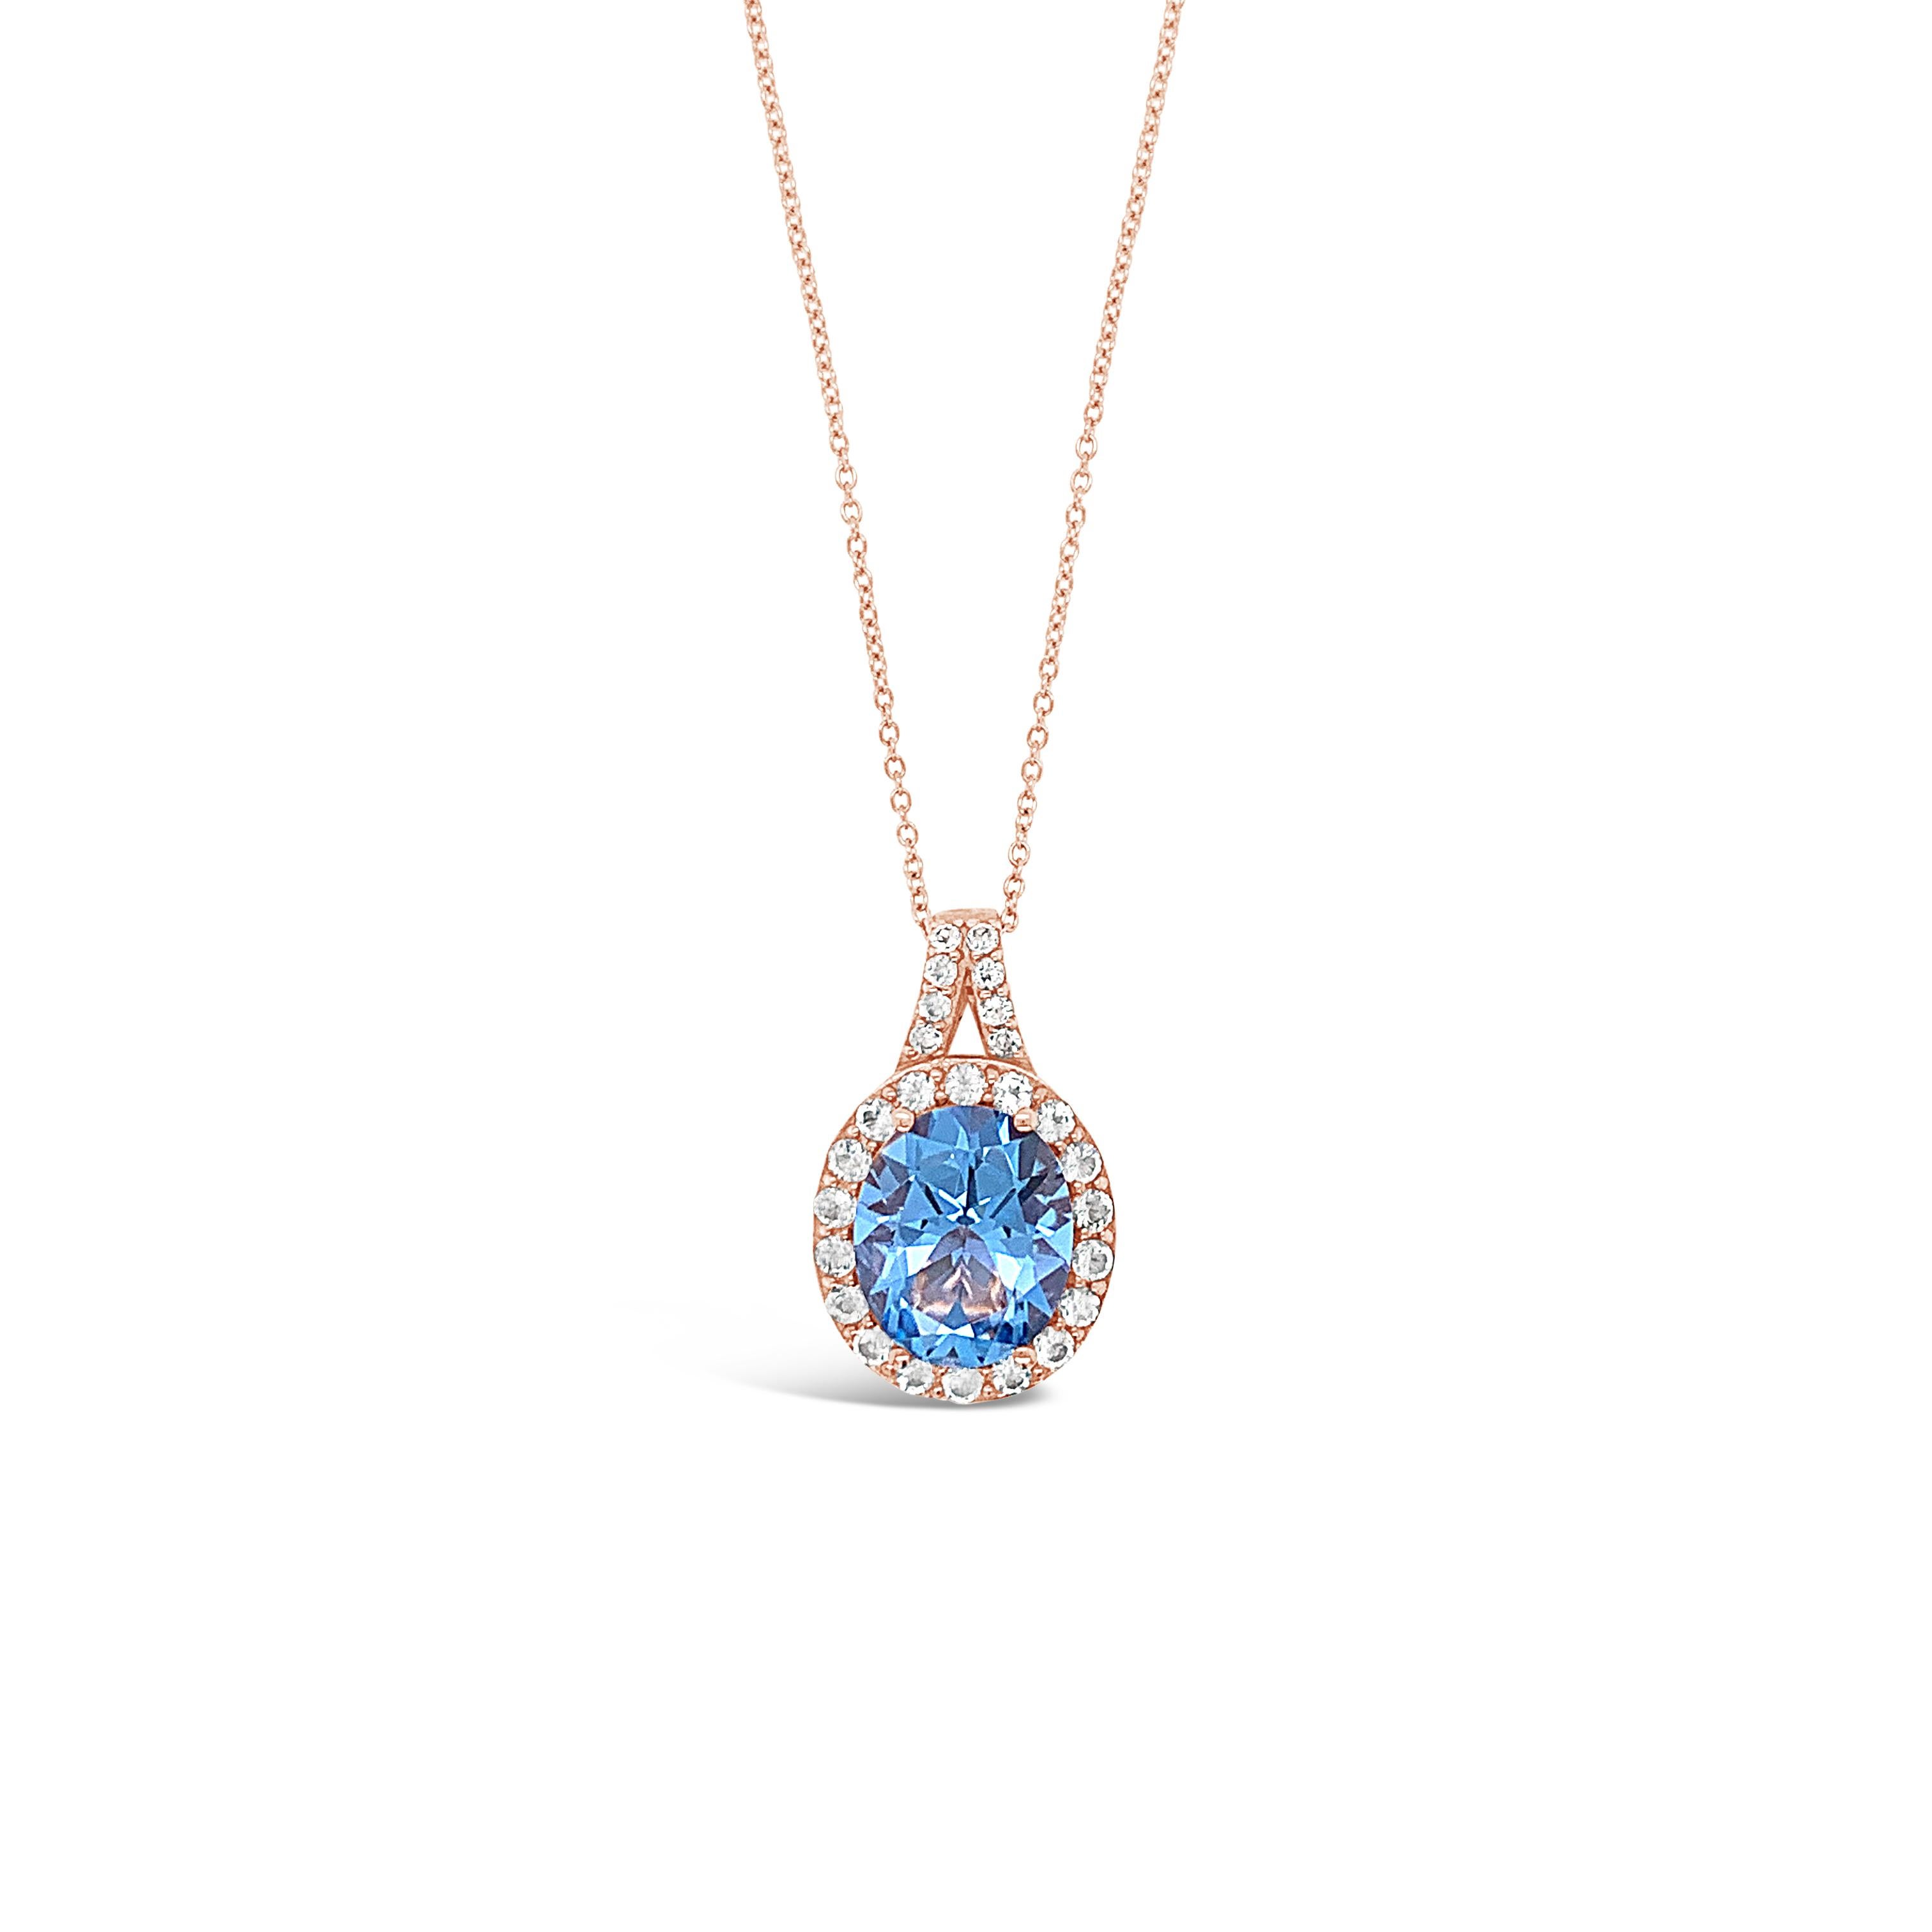 Roberto Ricci® Pendant featuring 5 cts. Ocean Blue Topaz™, 3/4 cts. Vanilla Topaz™, set in 14K Strawberry Gold®. Please feel free to reach out with any questions! Item comes with a suede pouch!
